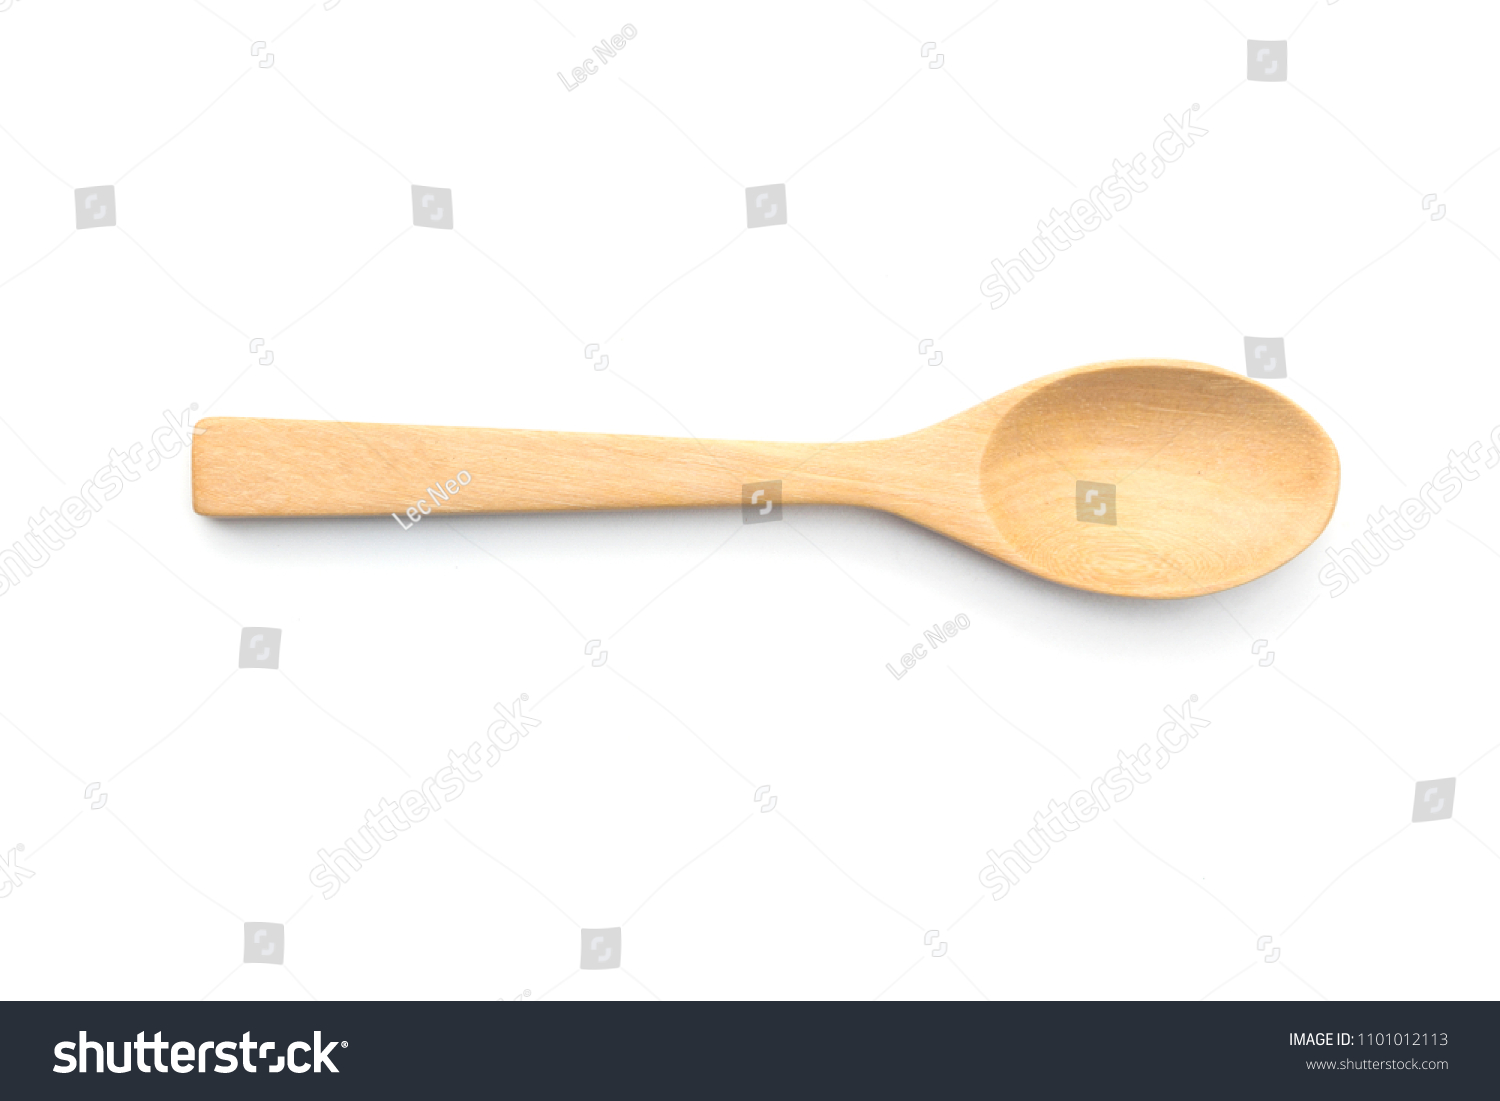 wooden spoon isolated on white background. #1101012113